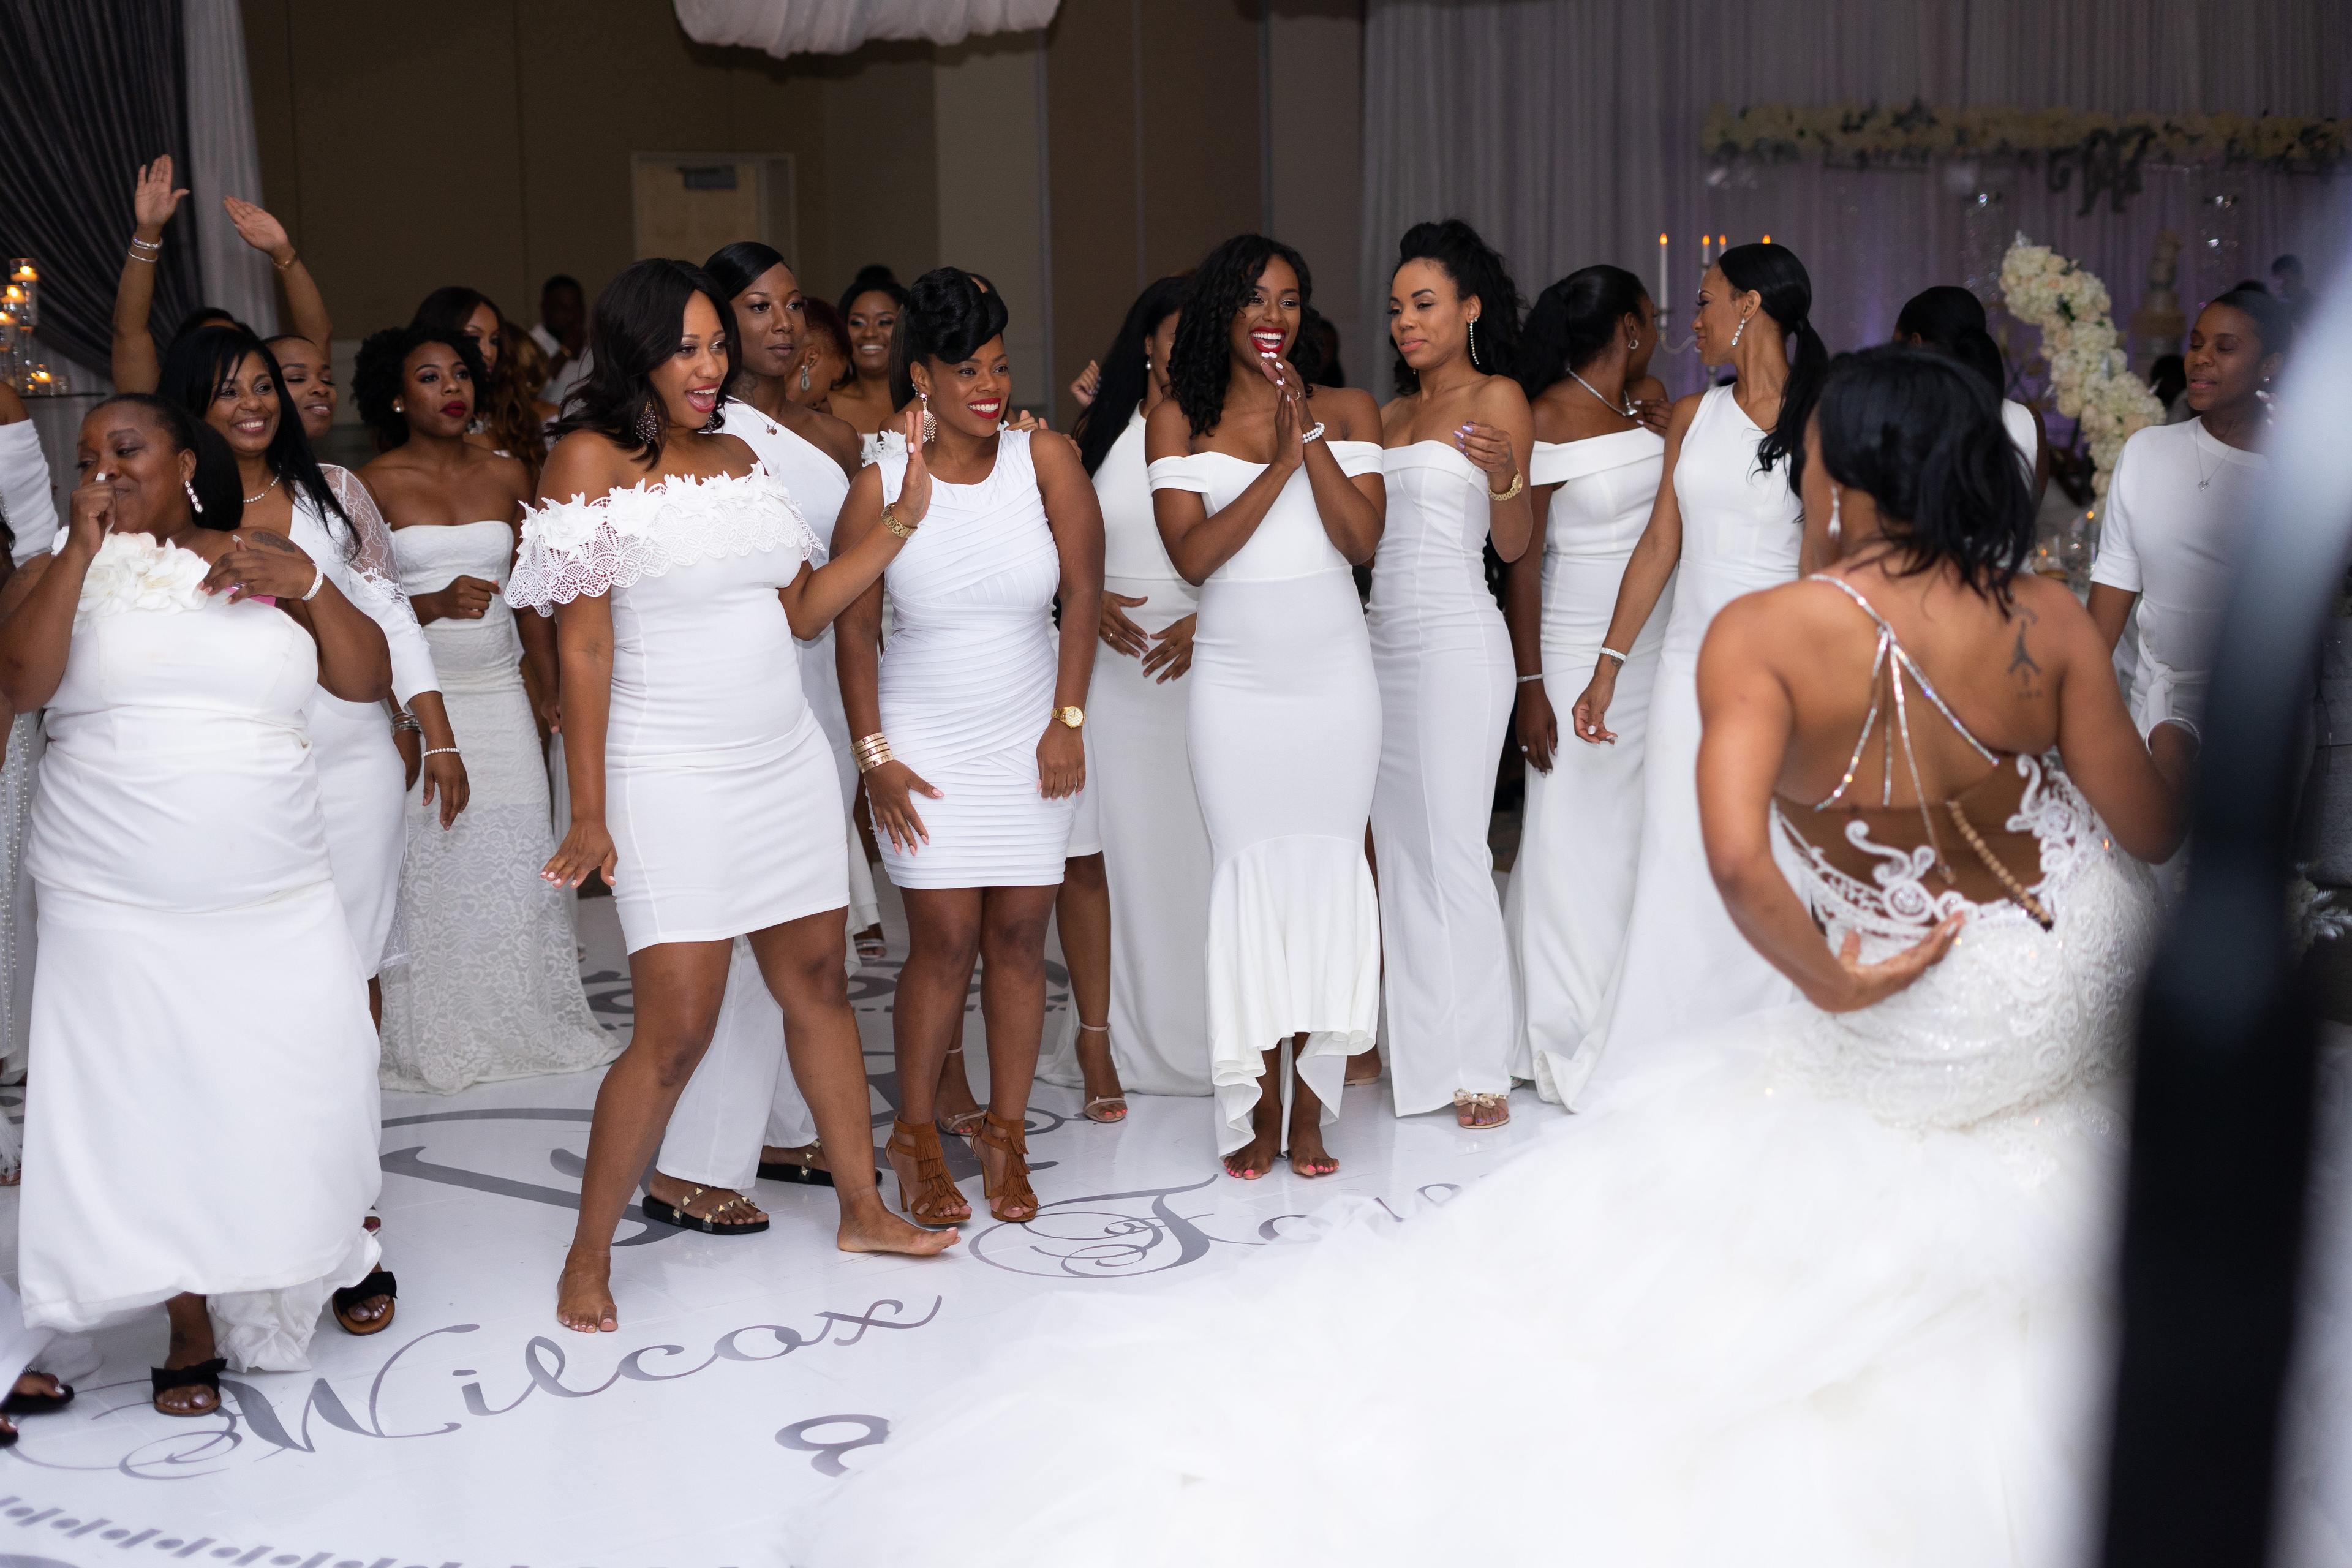 Bridal Bliss: Two Snaps For Altrichia and Anthony's All-White Summer Wedding